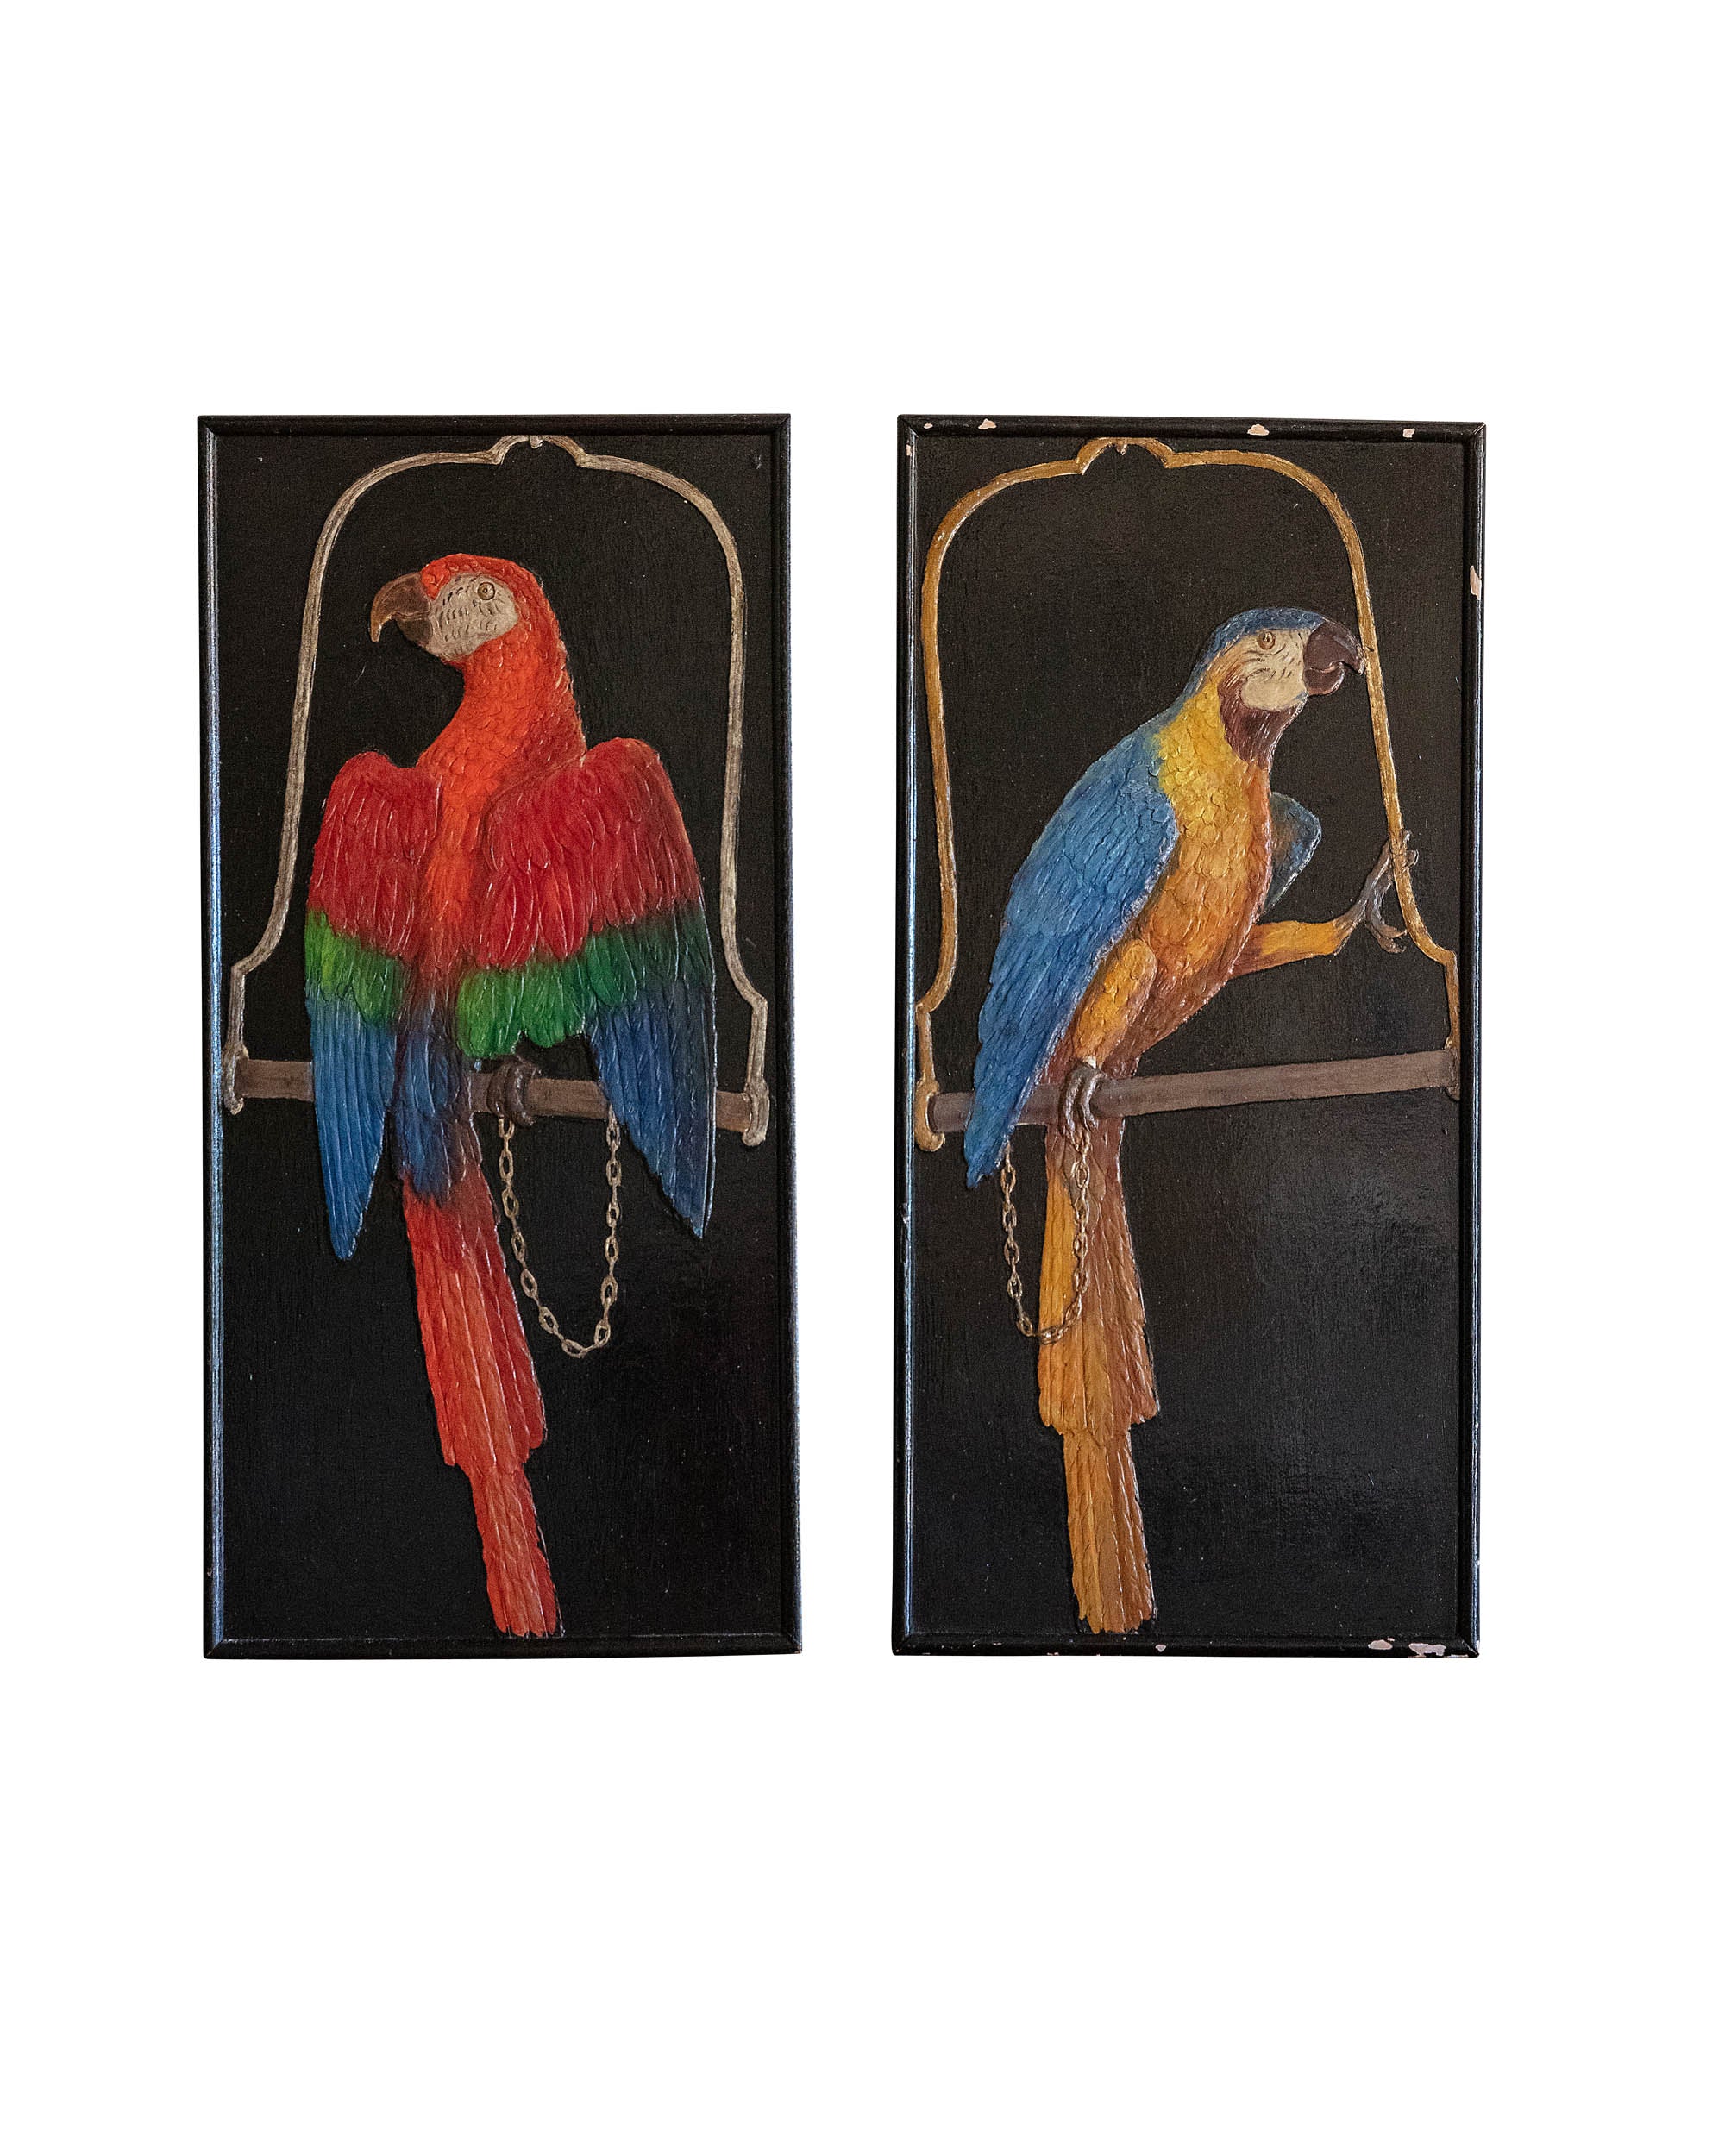 Pair of parrots painted on panels